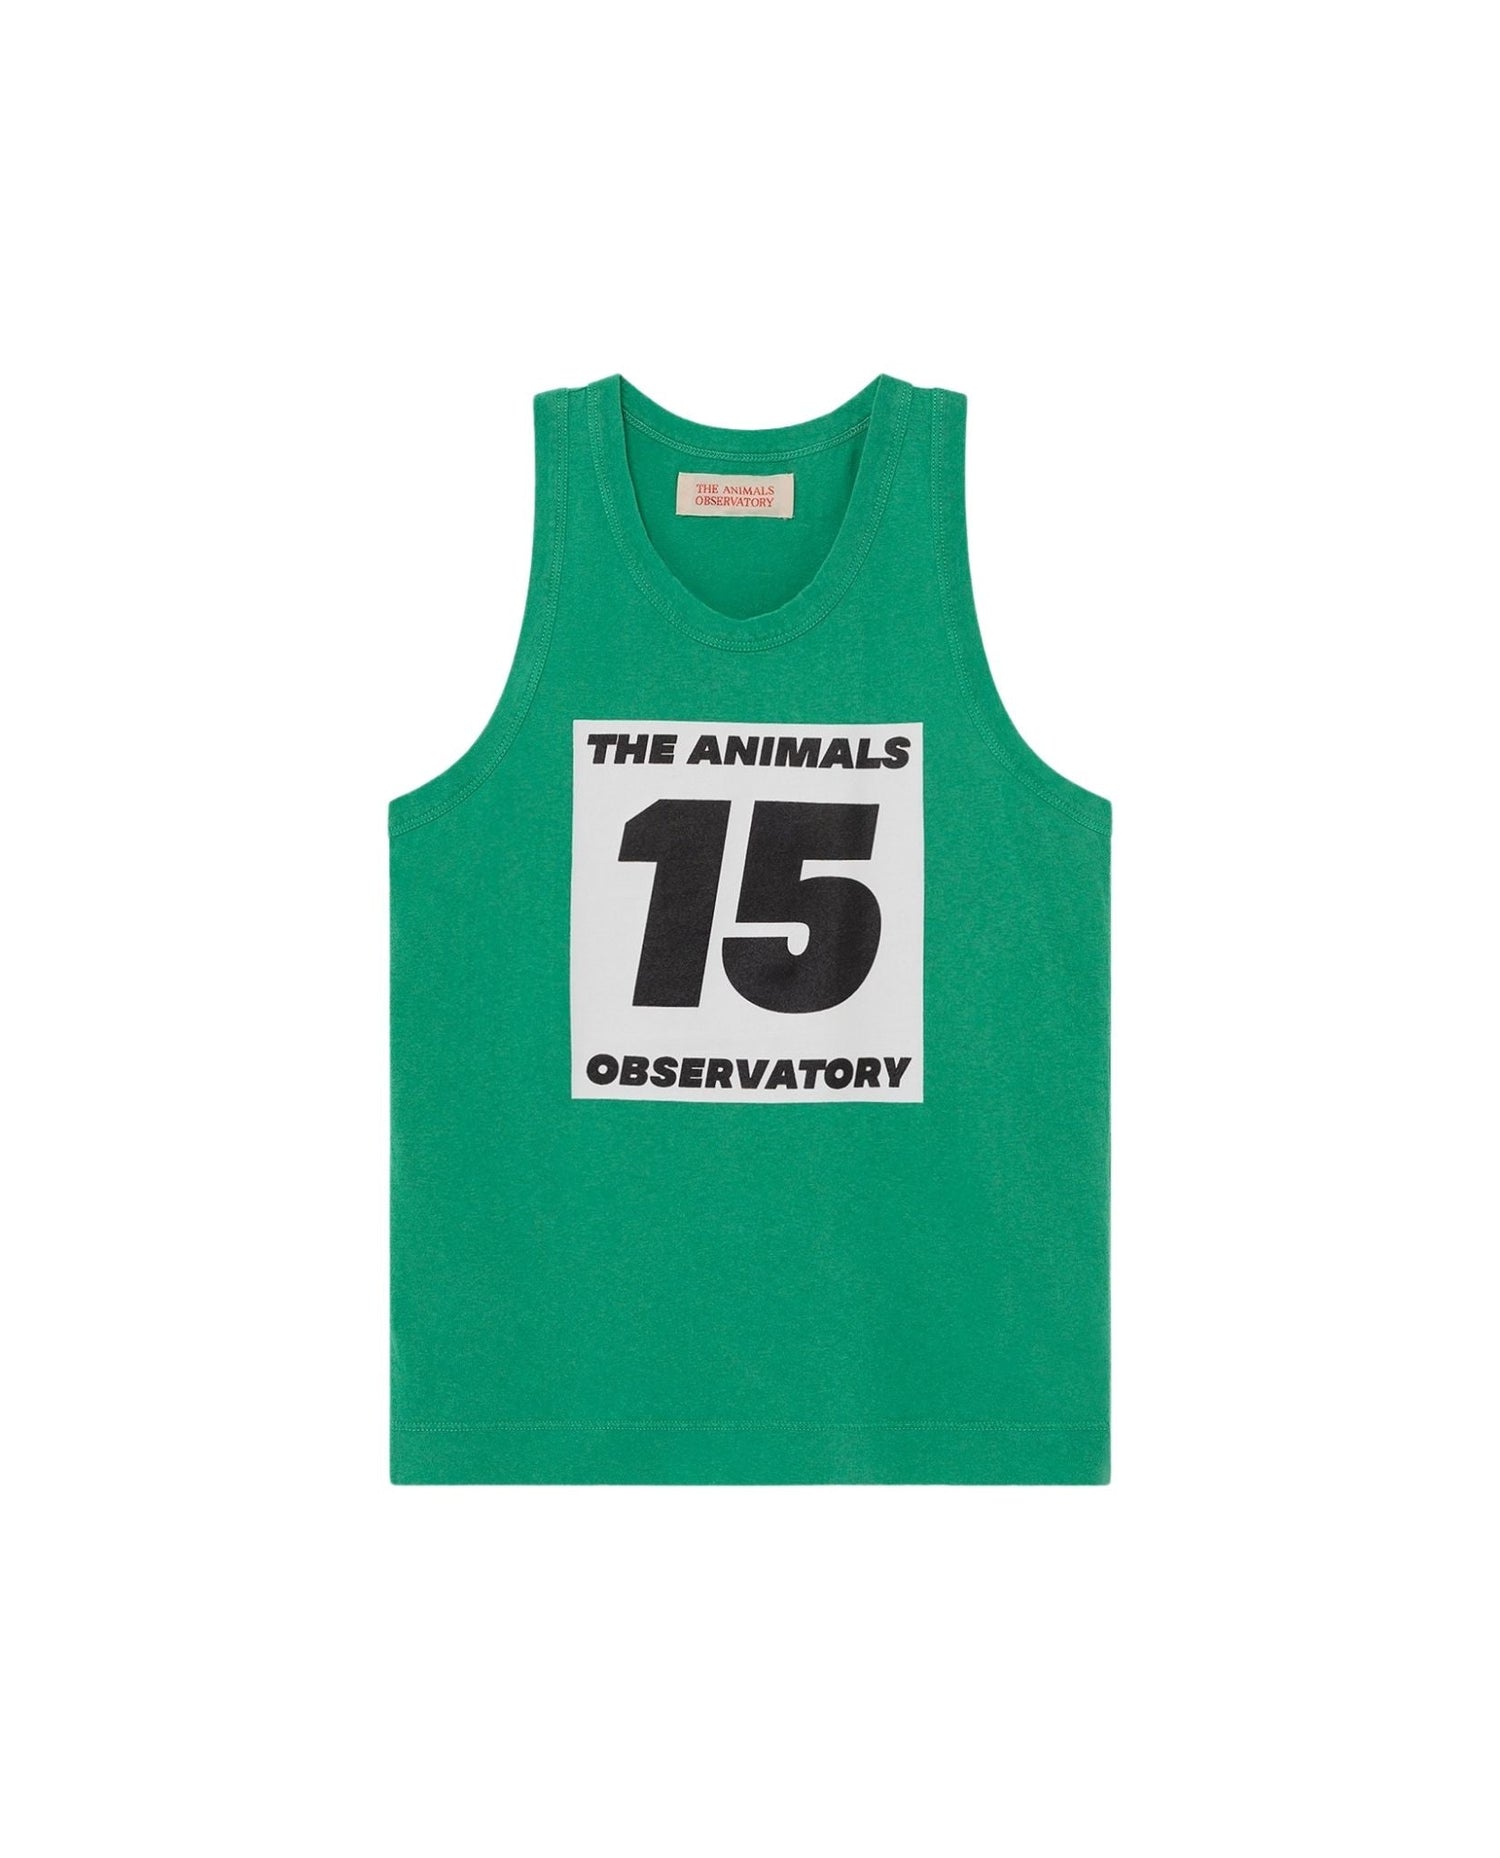 Tank Frog kids t-shirt Green 15 Tops The Animals Observatory 